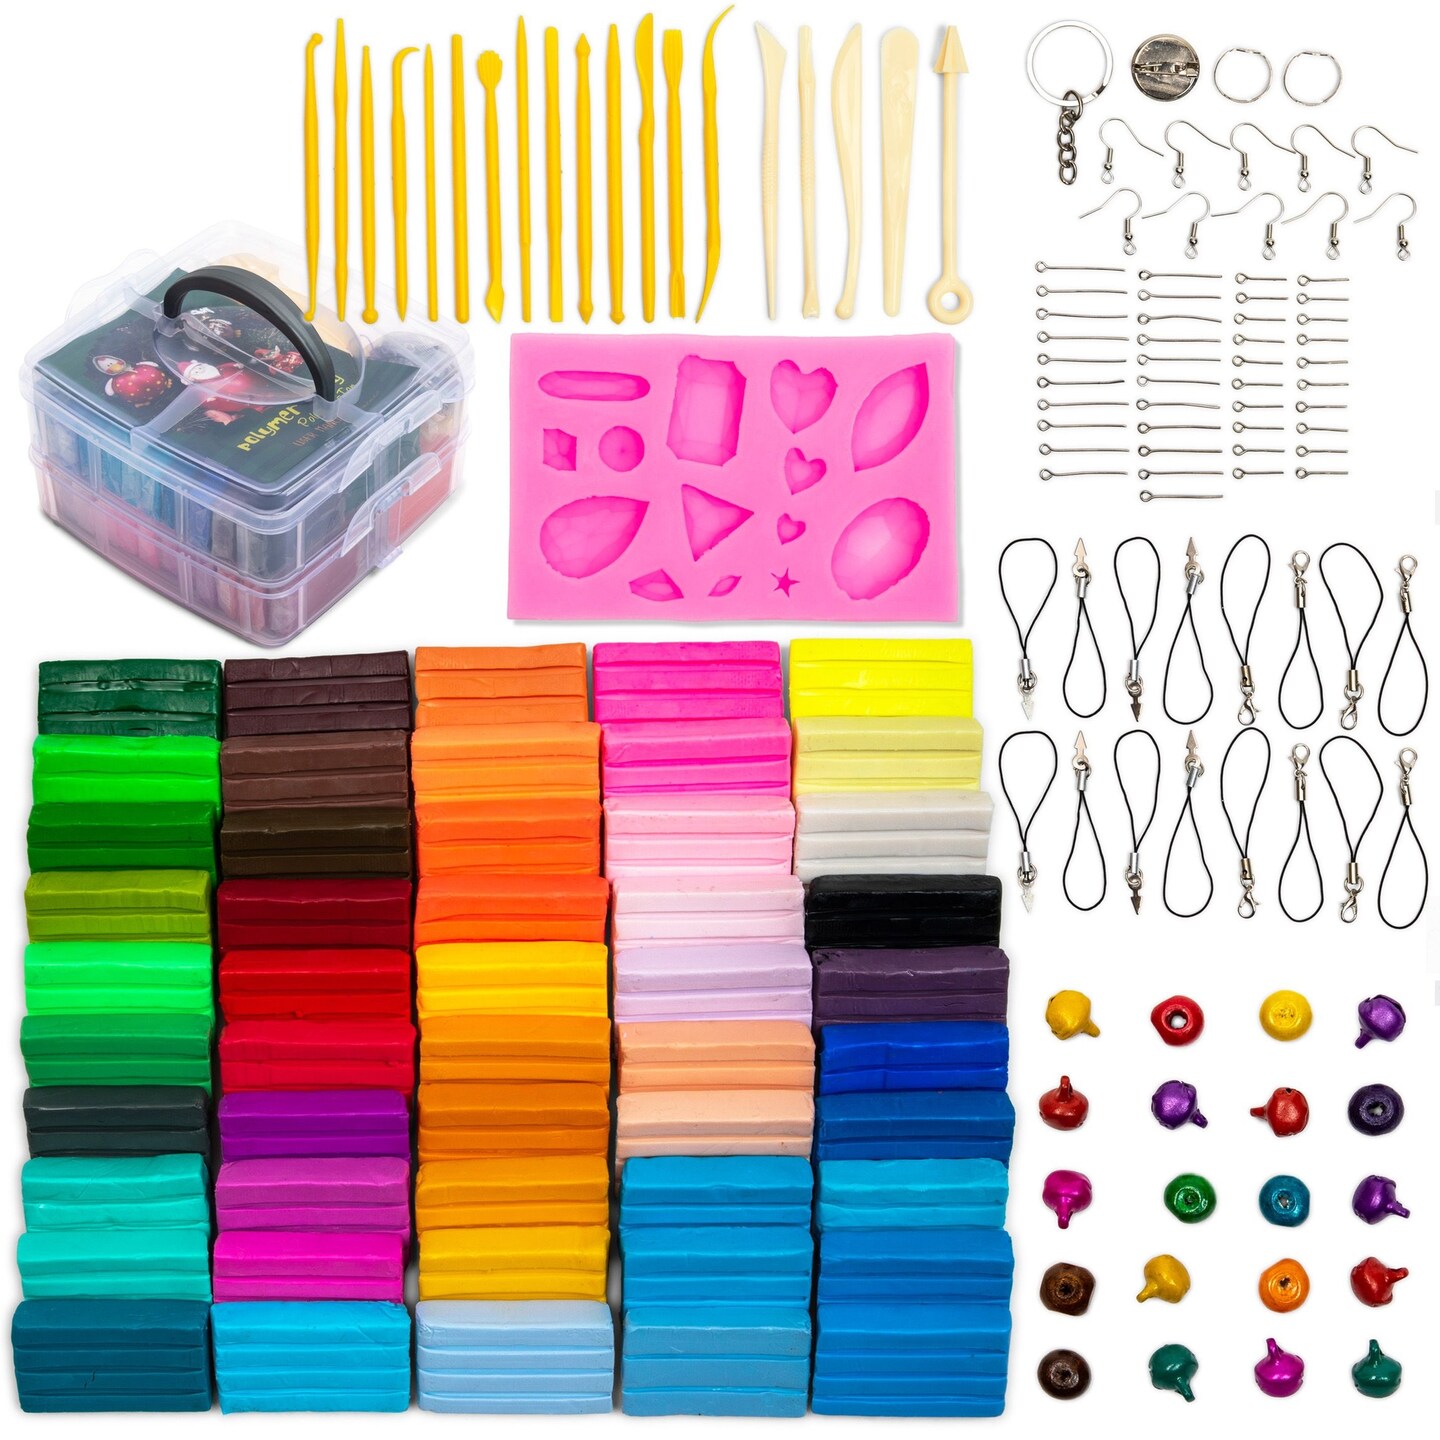 Professional DIY Clay Tool Set - 25 Pieces Modeling Clay Sculpting